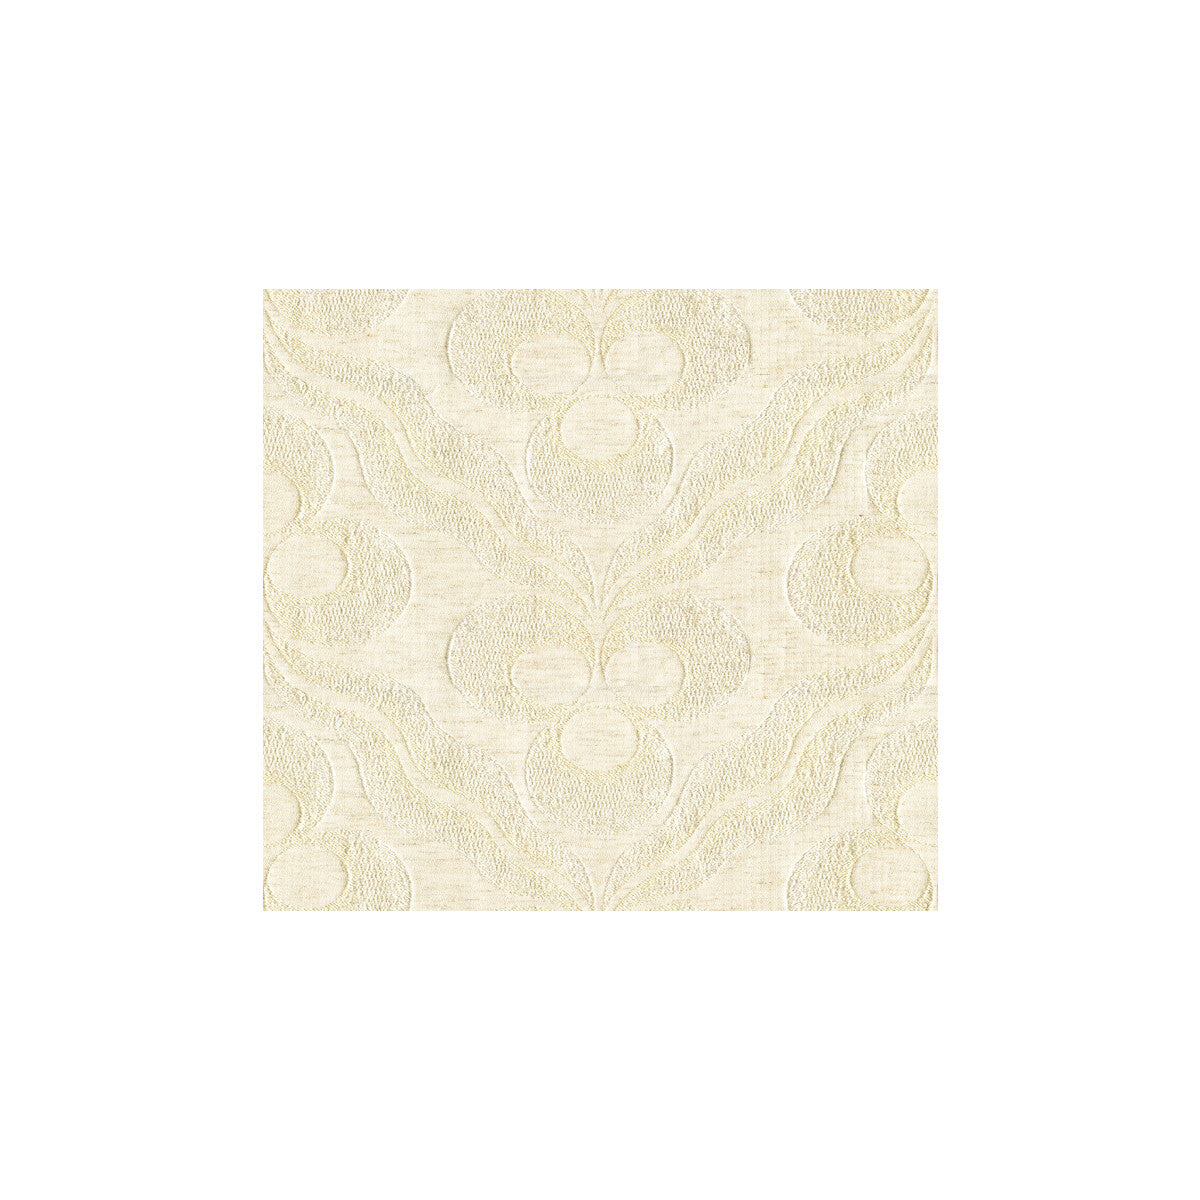 Topkapi Spot fabric in blanc color - pattern 30175.1.0 - by Kravet Couture in the Modern Colors II collection